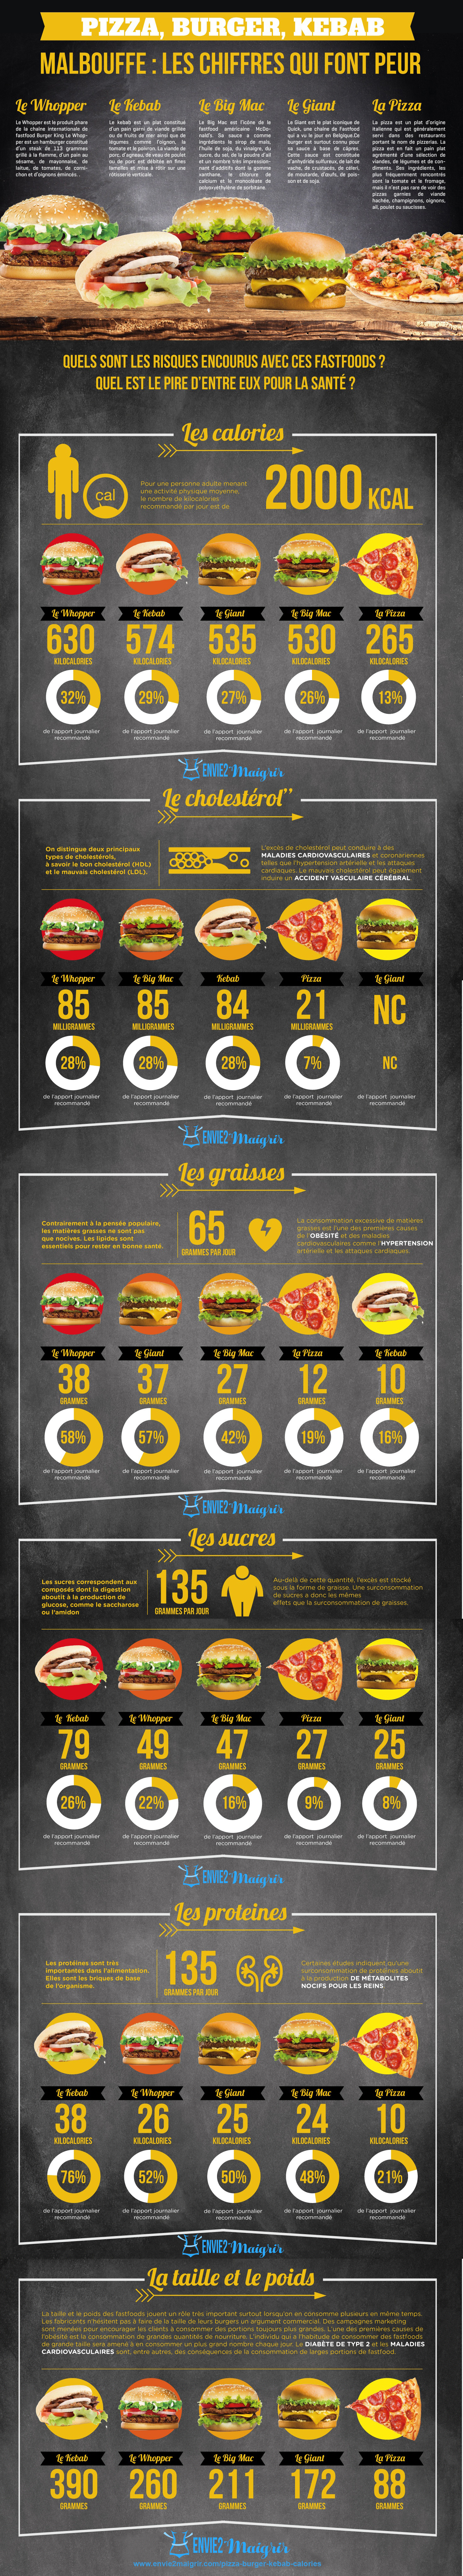 Infographie-malbouffe